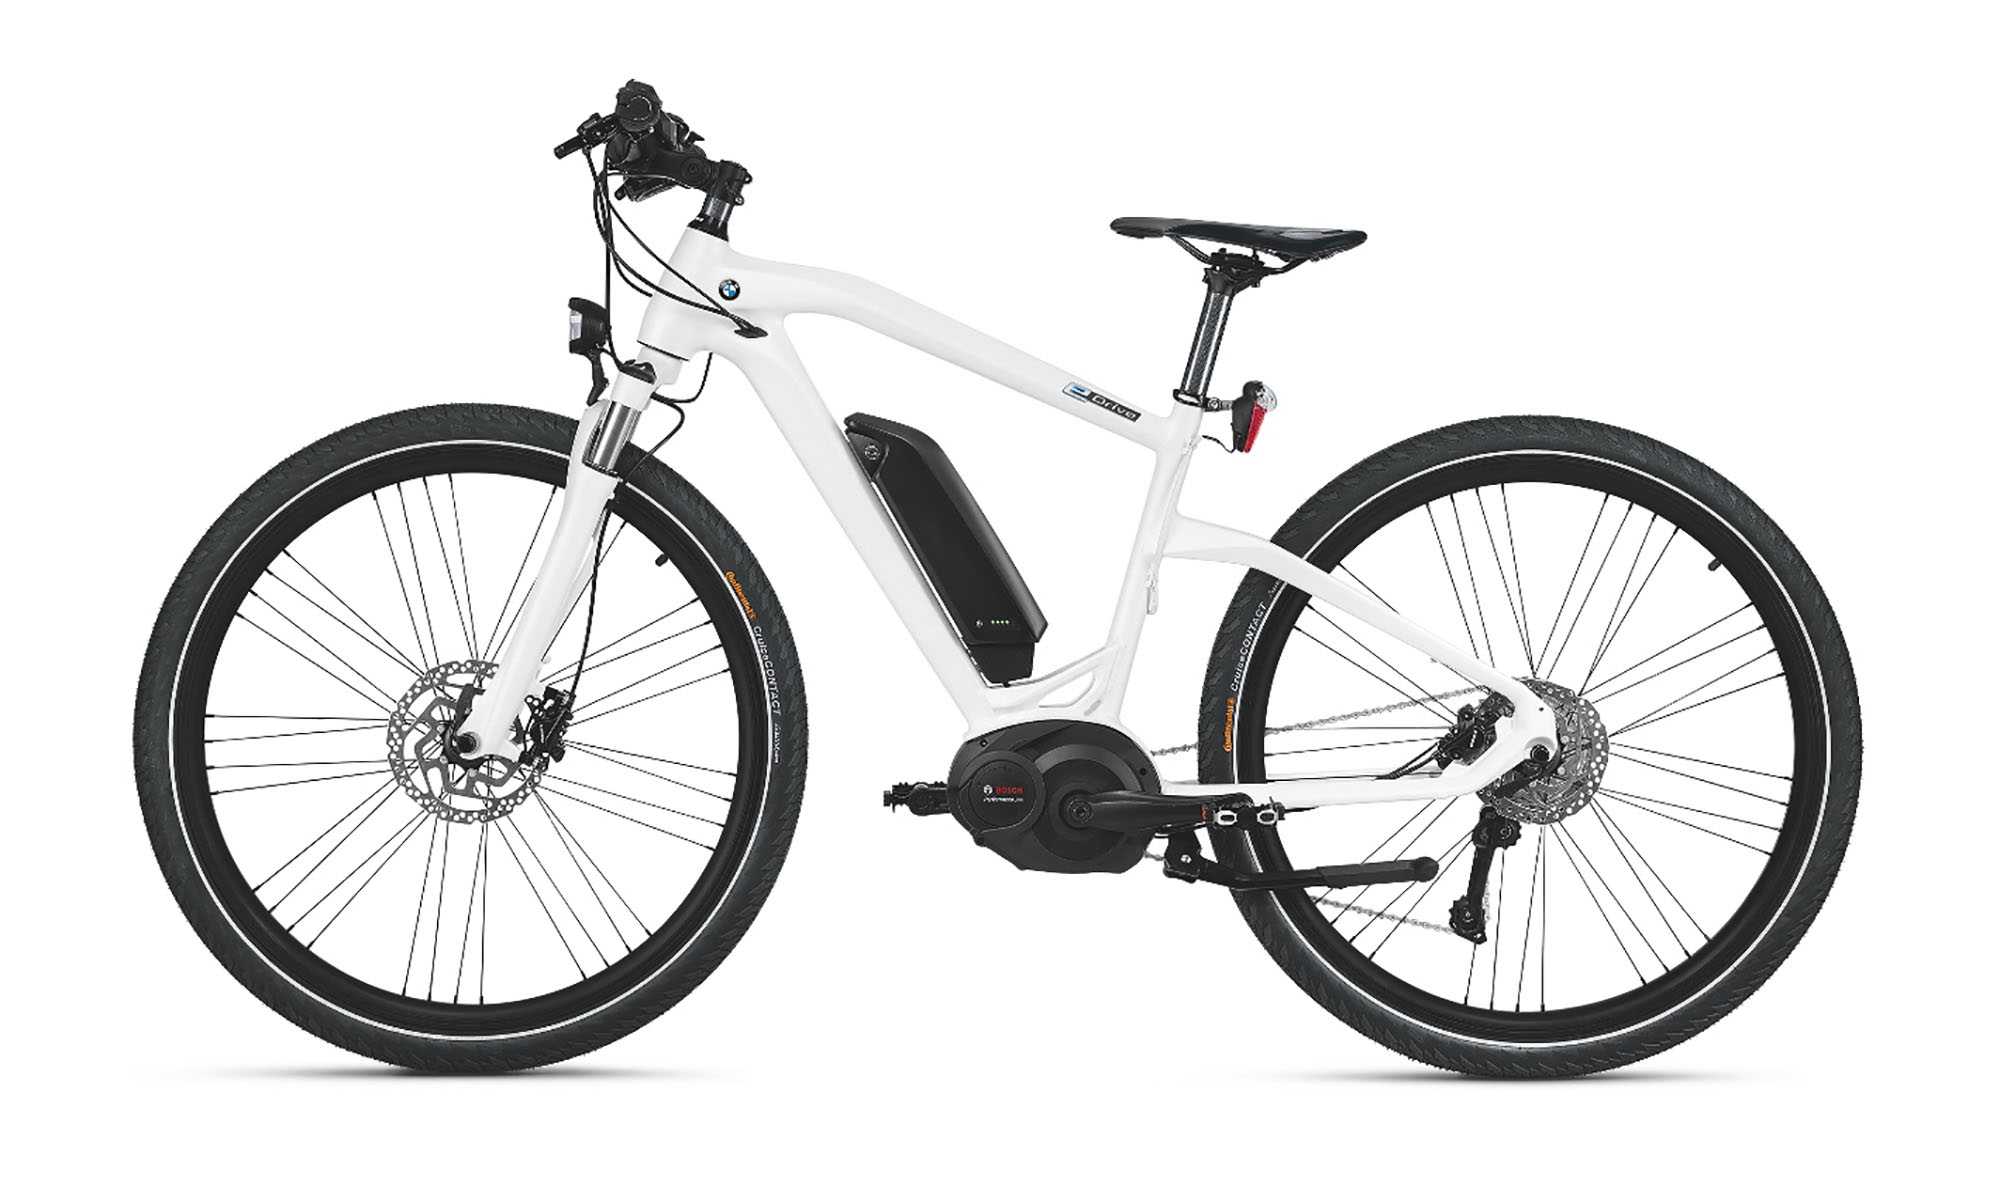 operator Tegen Kapper BMW of North America Presents the New BMW Cruise e-Bike as Part of its 2016  Bicycle Collection.